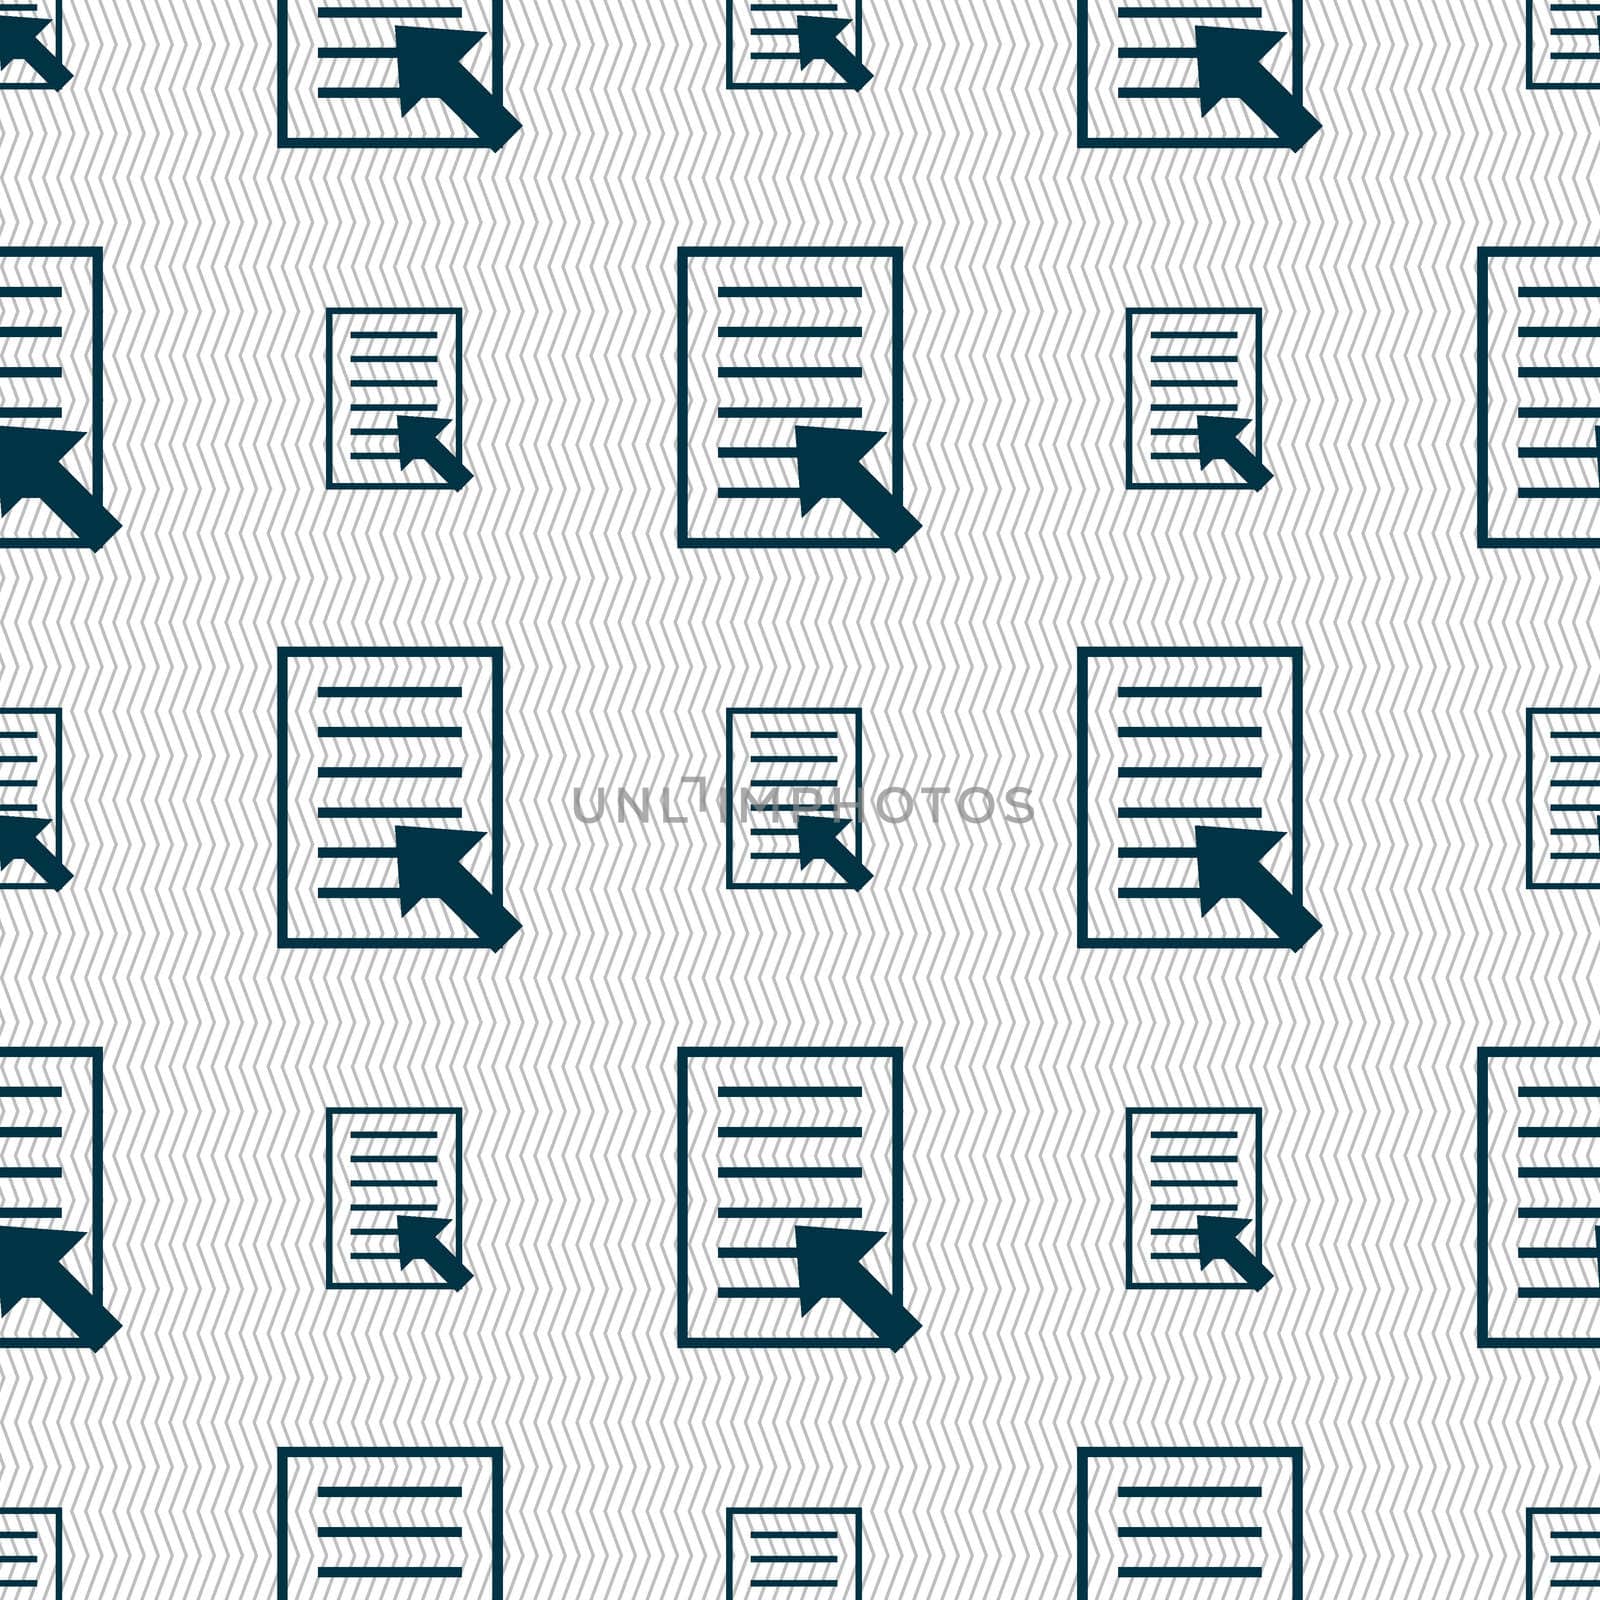 Text file sign icon. File document symbol. Seamless abstract background with geometric shapes. illustration